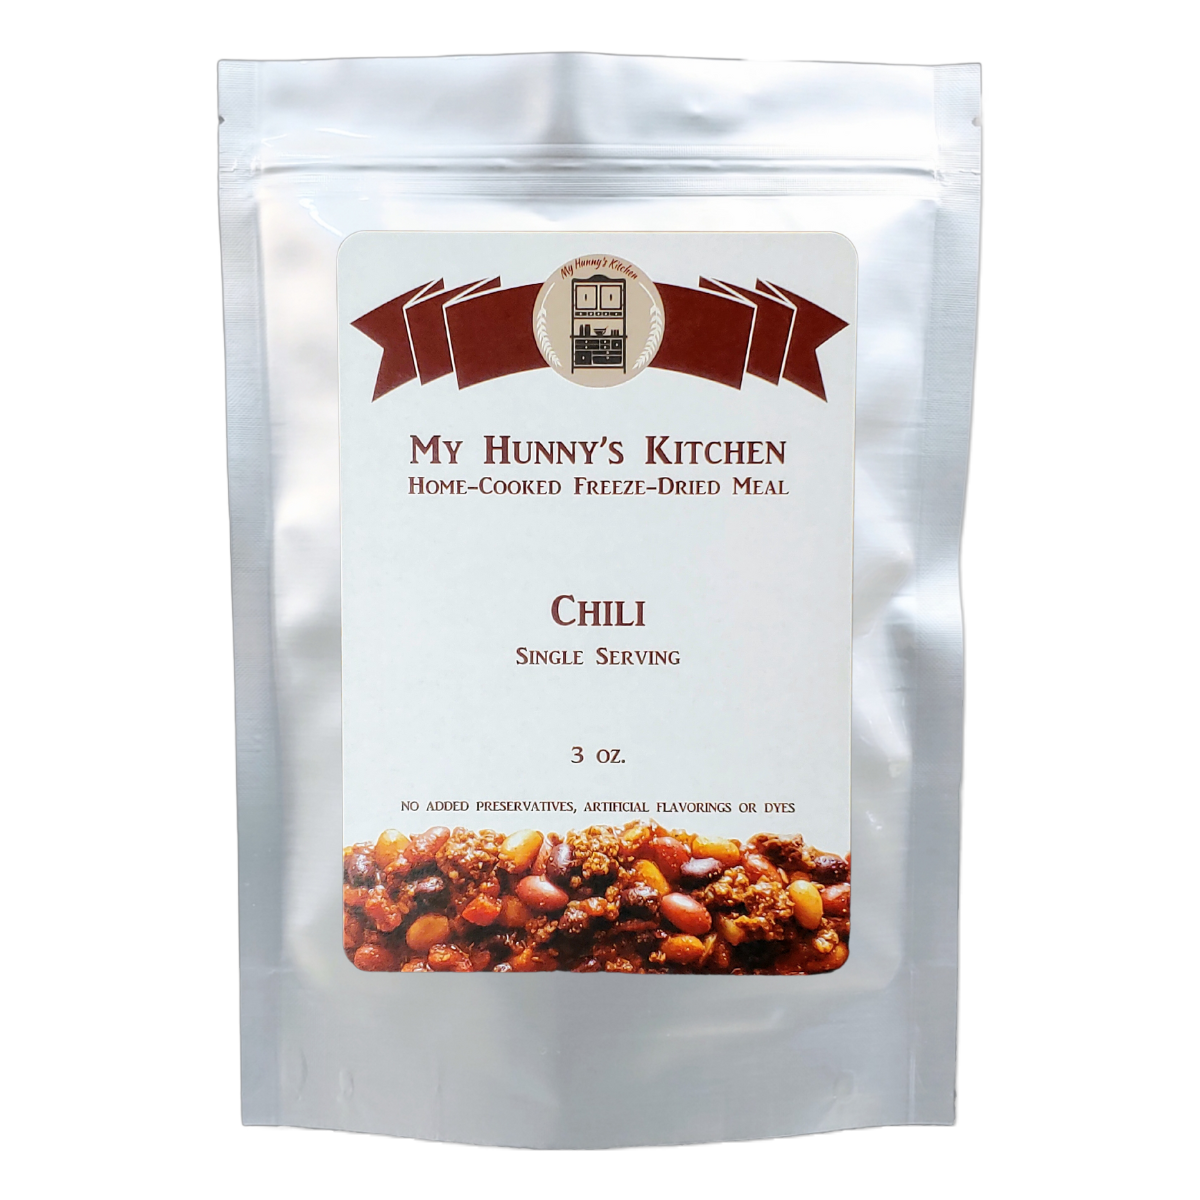 Chili Freeze Dried Meal packaging front view